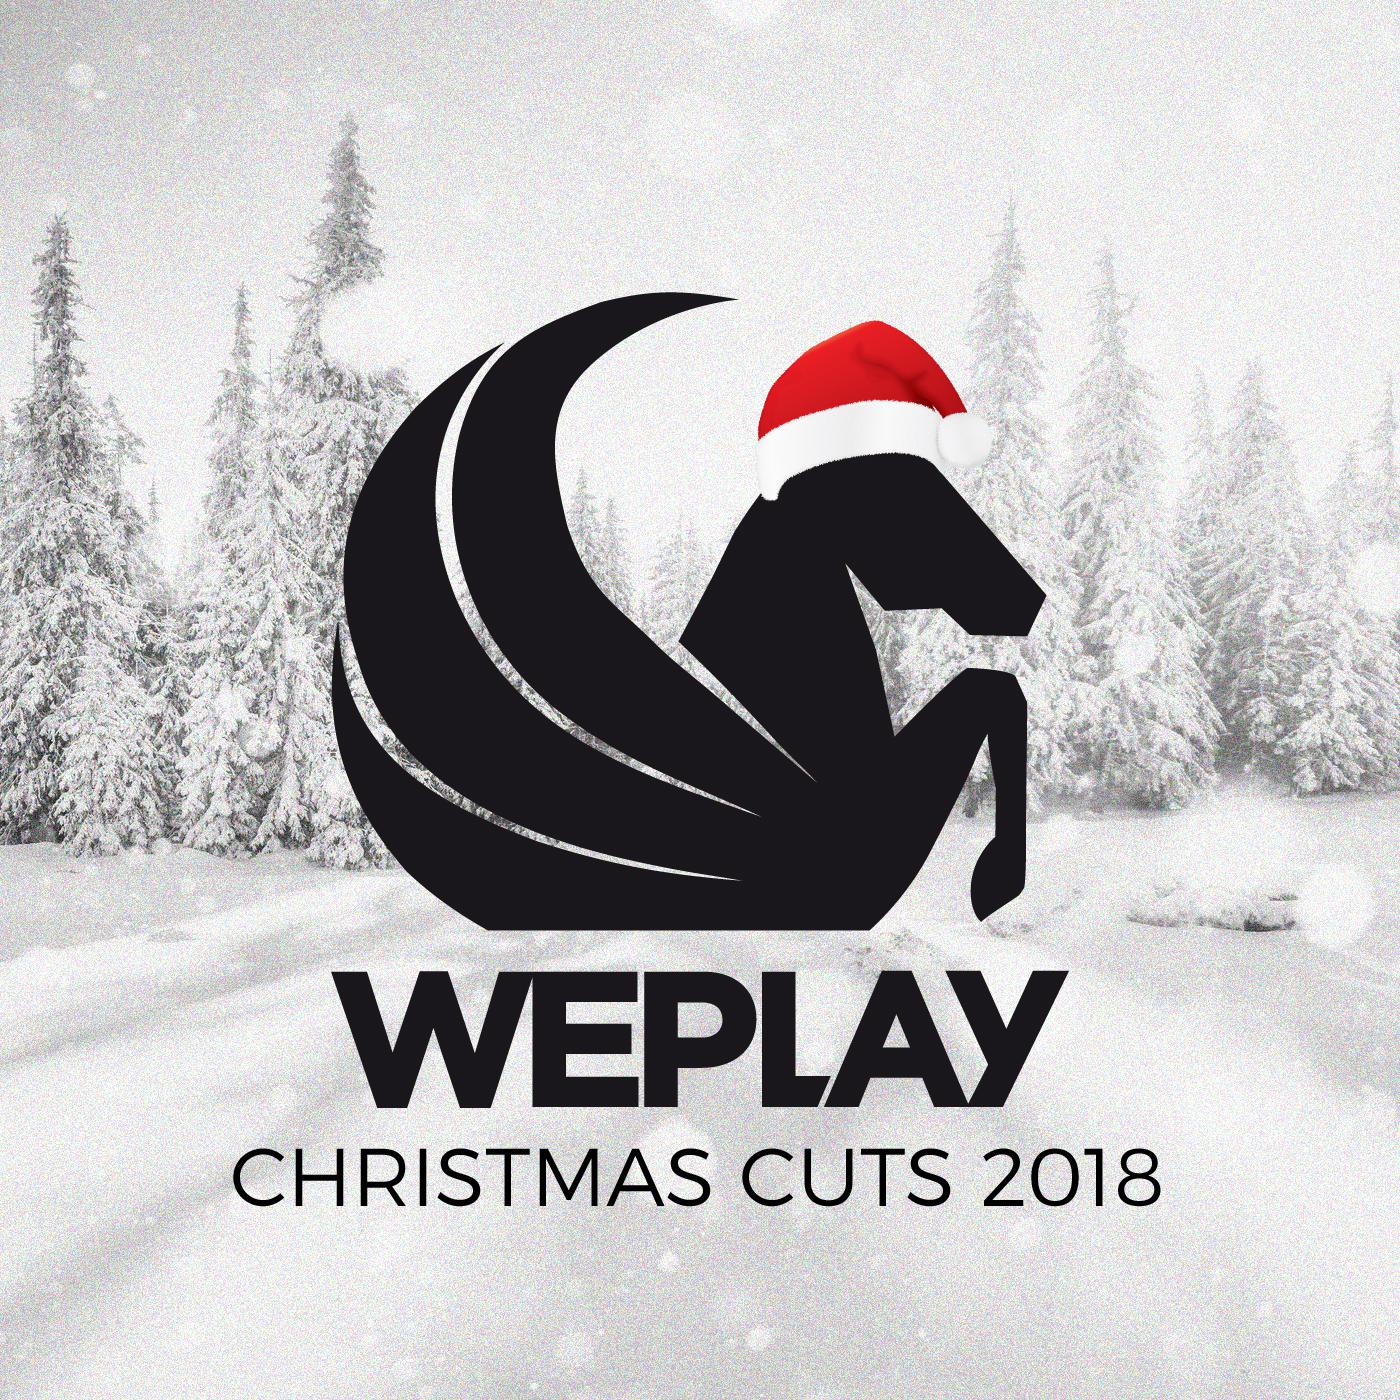 WEPLAY Christmas Cuts 2018